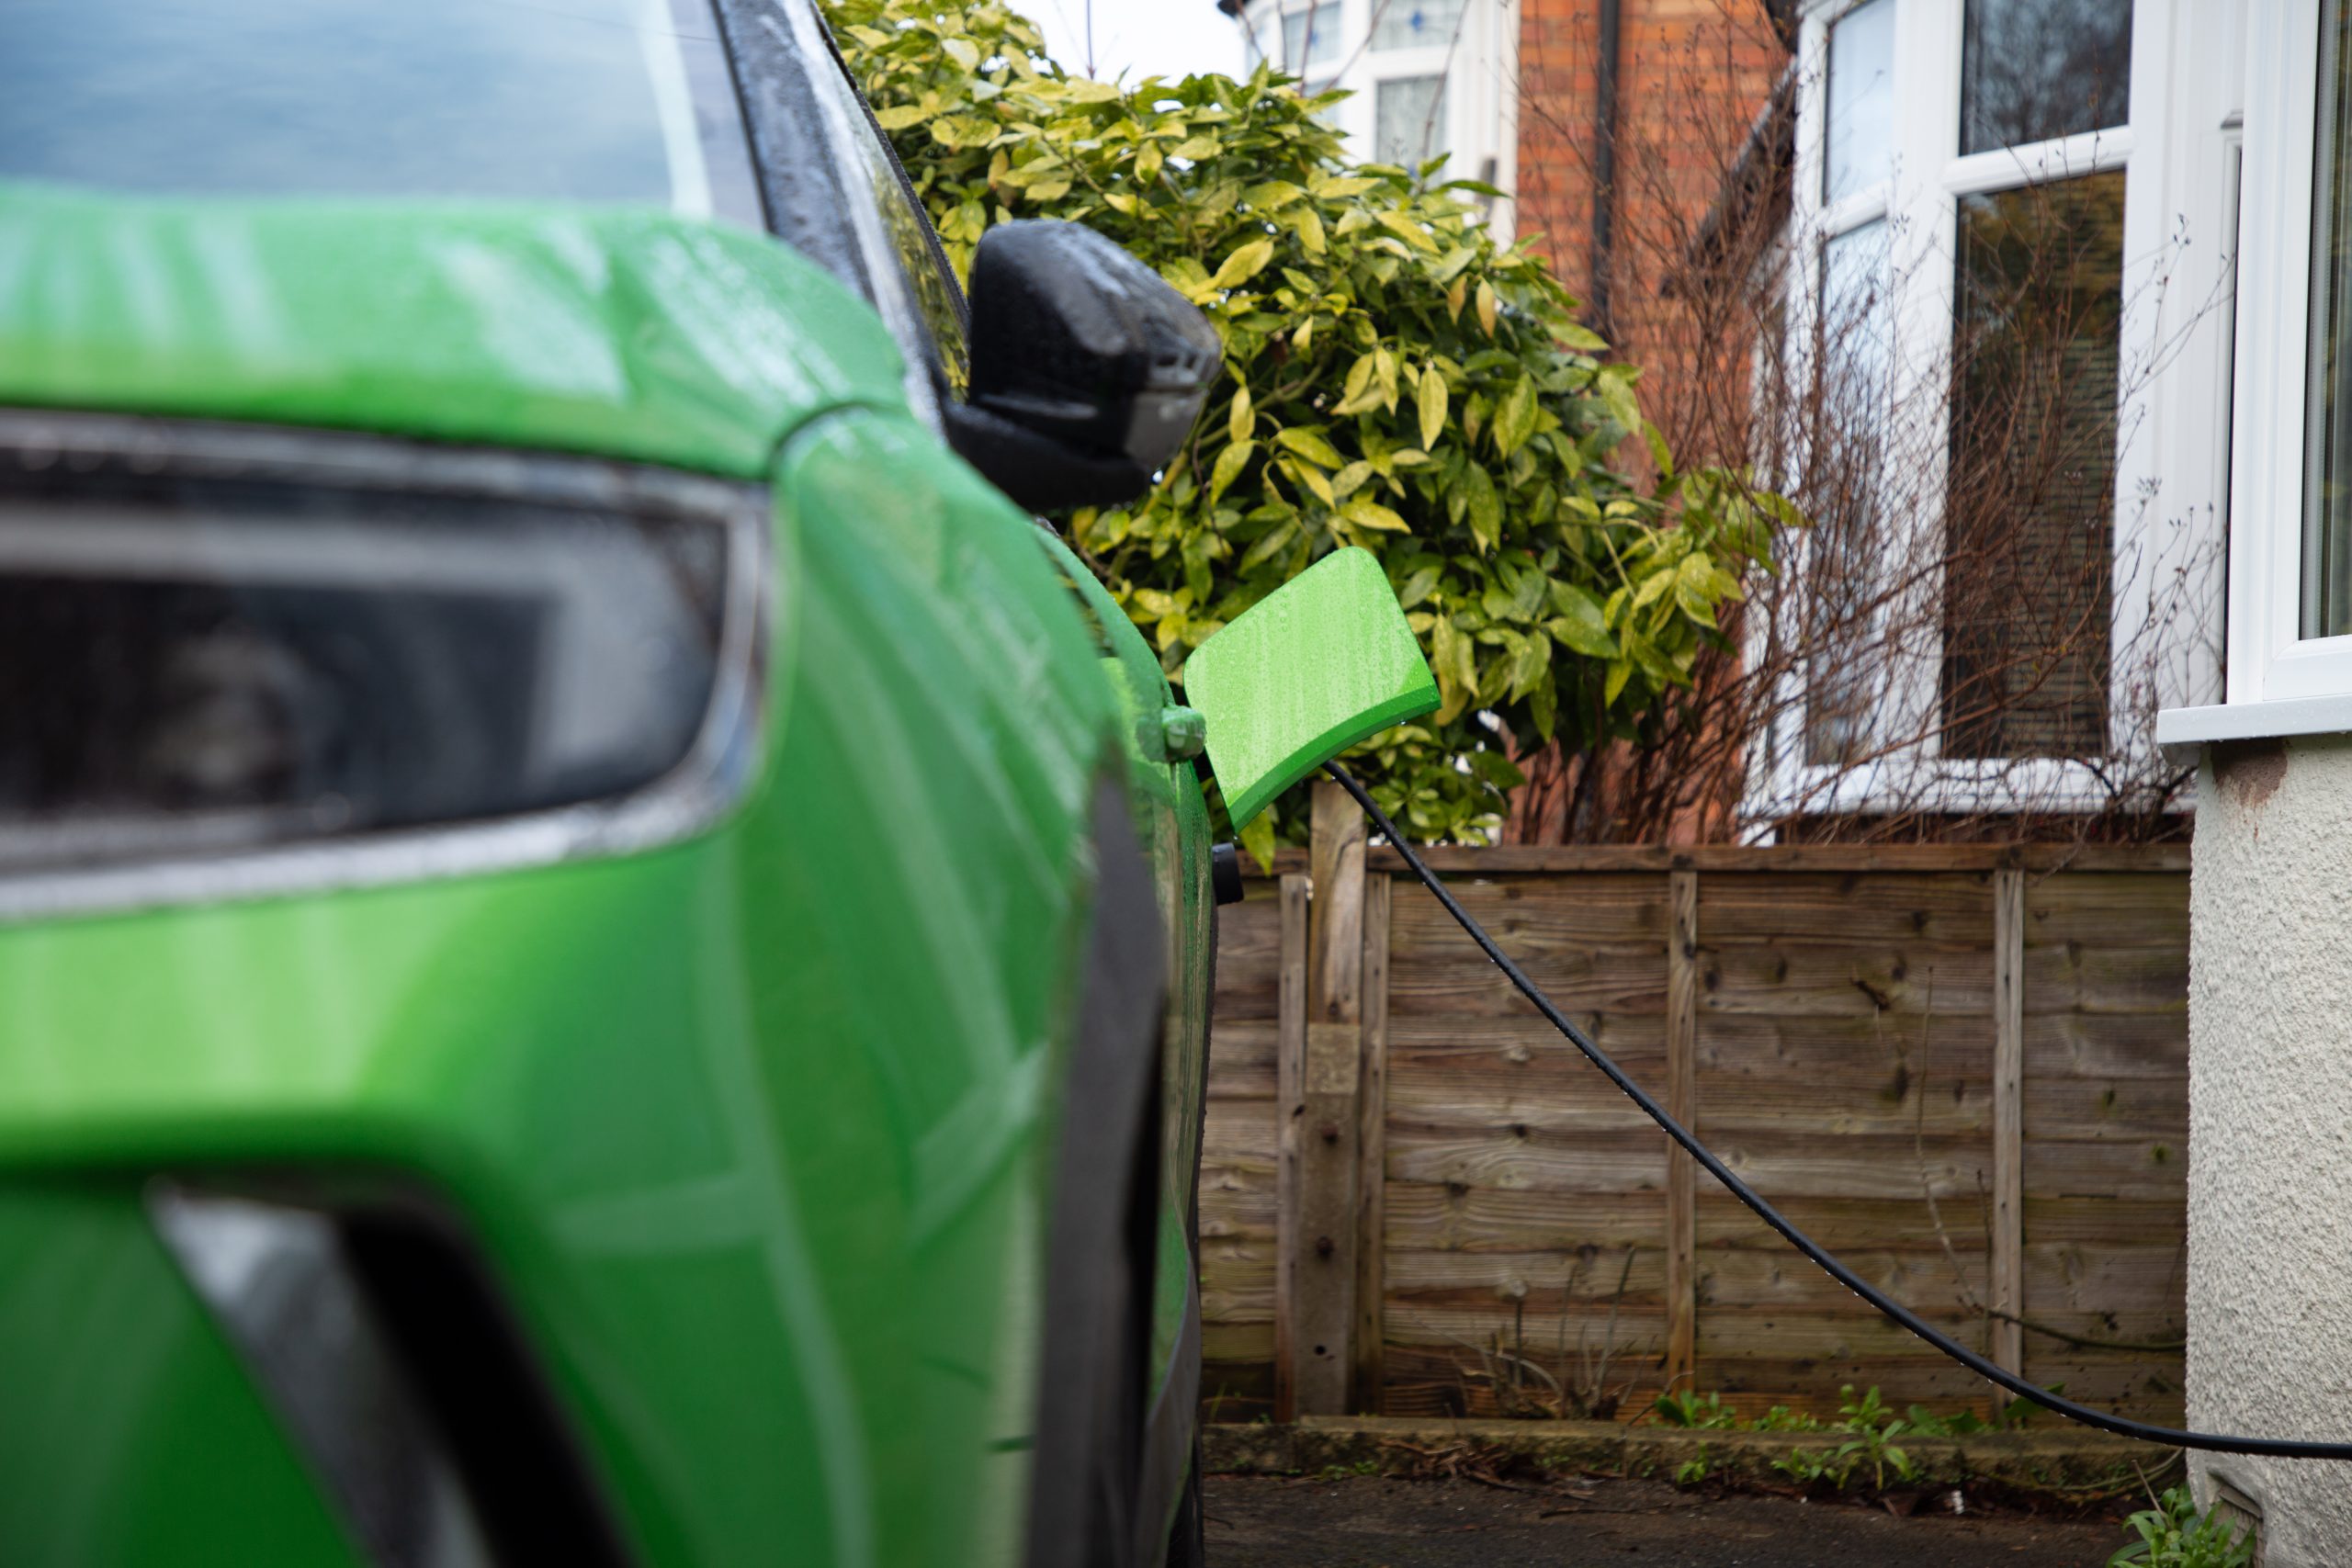 Electric vehicle charging at home